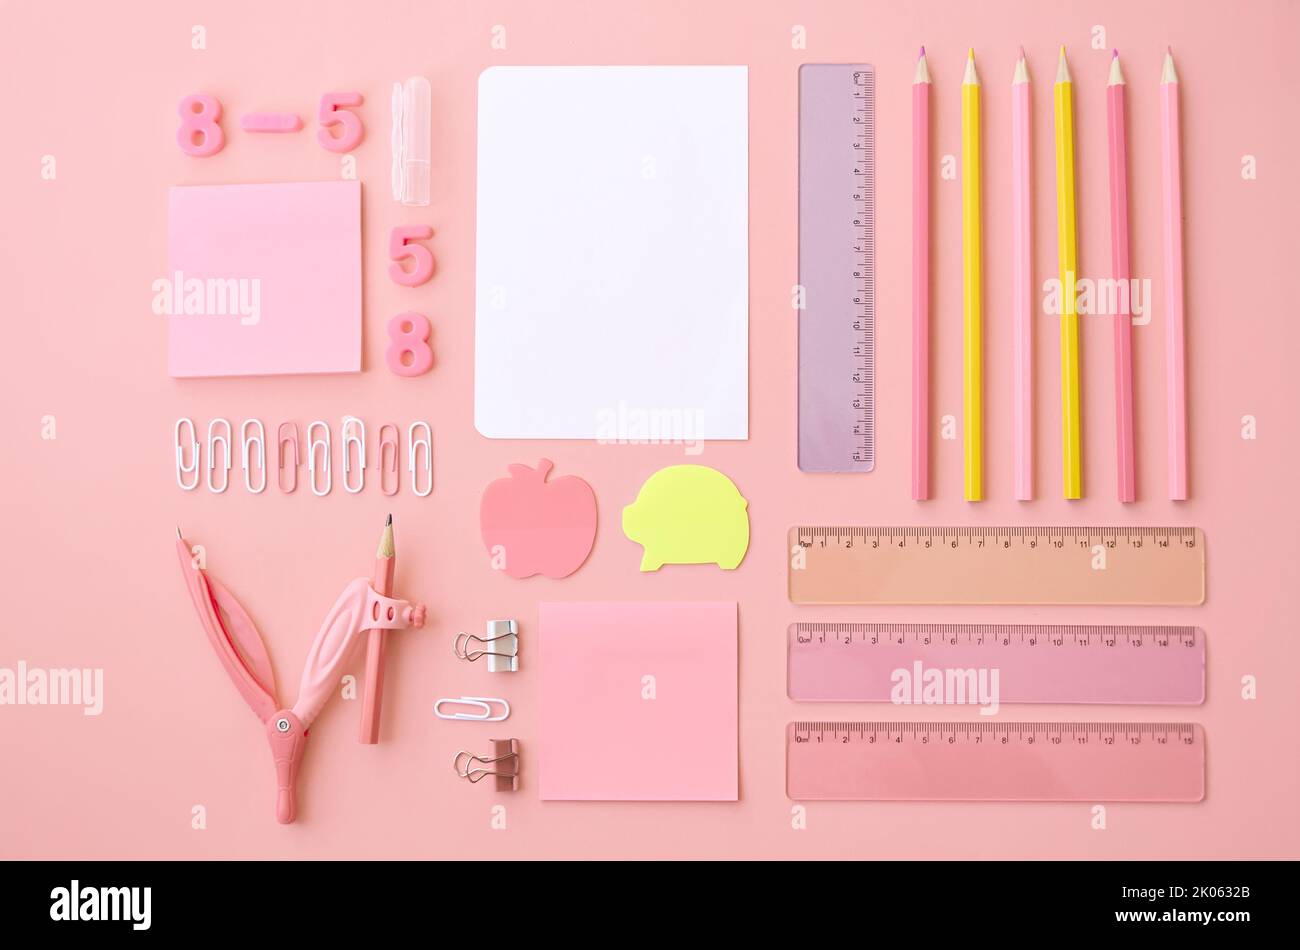 A Flat Lay Of School Supplies Of Pink And White Colors On A Pink Background  Suitable For School Or Office Girls . Stock Photo, Picture and Royalty Free  Image. Image 84201690.